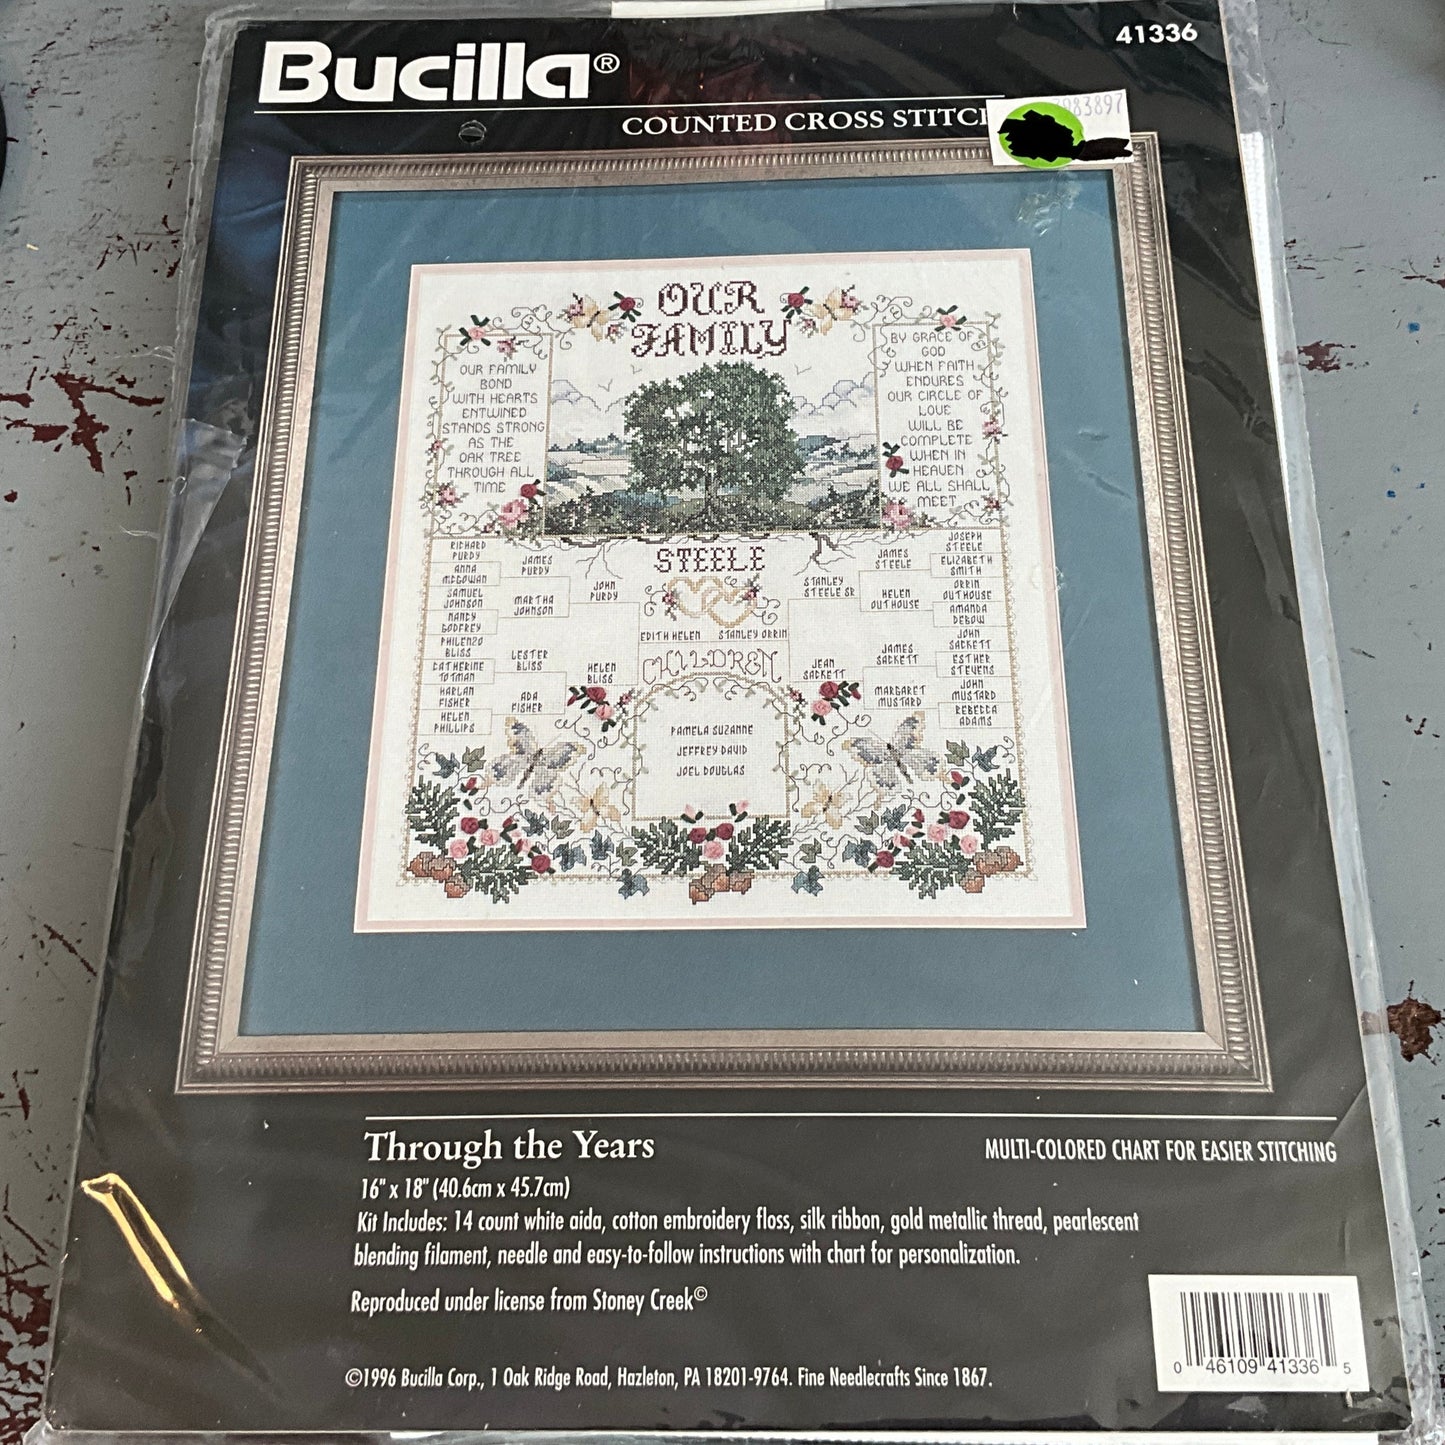 Bucilla Through the Years 41336 vintage 1996 counted cross stitch kit 14 count white AIDA 16 by 18 inches